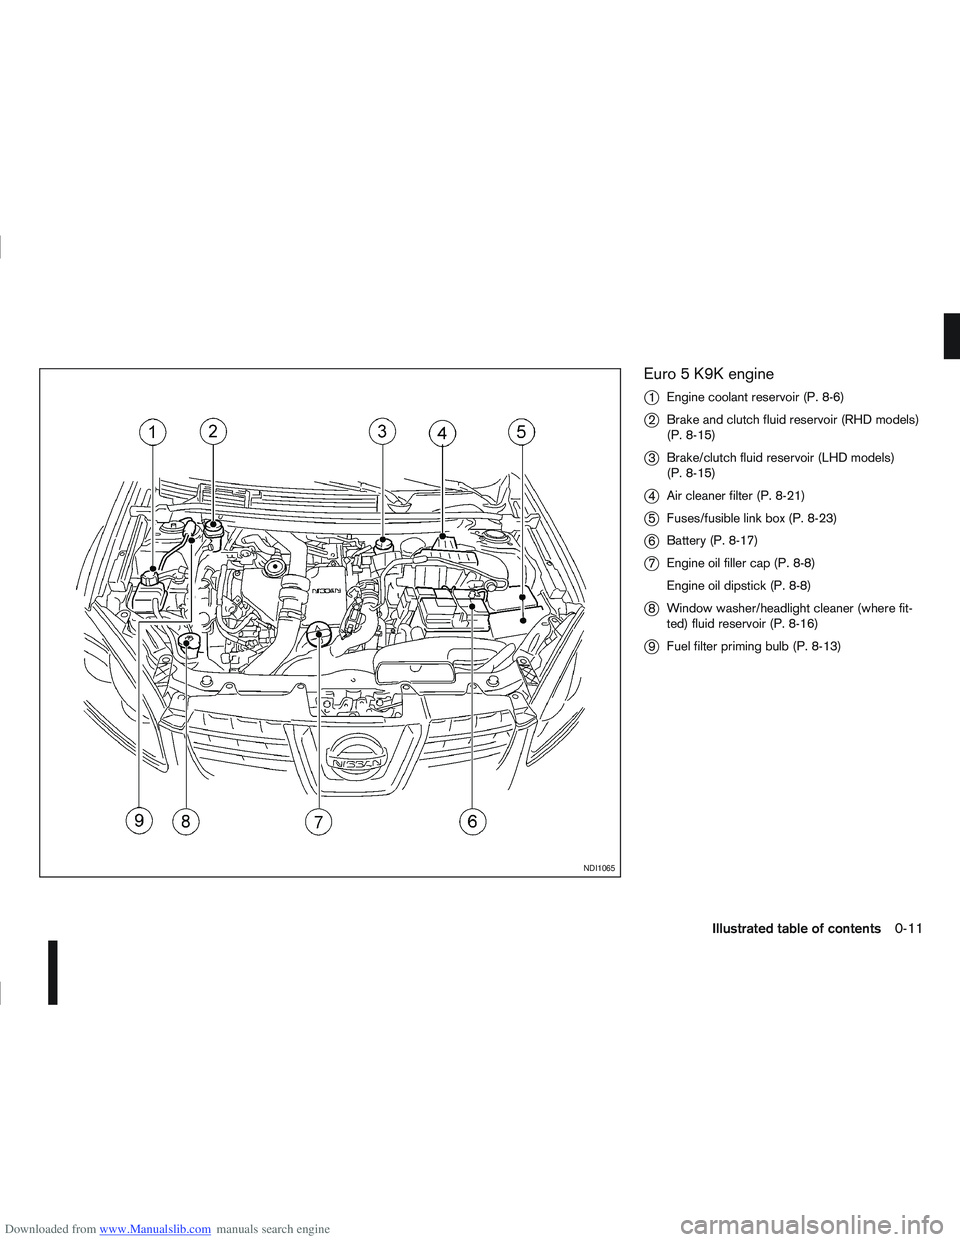 NISSAN QASHQAI 2006  Owners Manual Downloaded from www.Manualslib.com manuals search engine Euro 5 K9K engine
j
1Engine coolant reservoir (P. 8-6)
j2Brake and clutch fluid reservoir (RHD models)
(P. 8-15)
j3Brake/clutch fluid reservoir